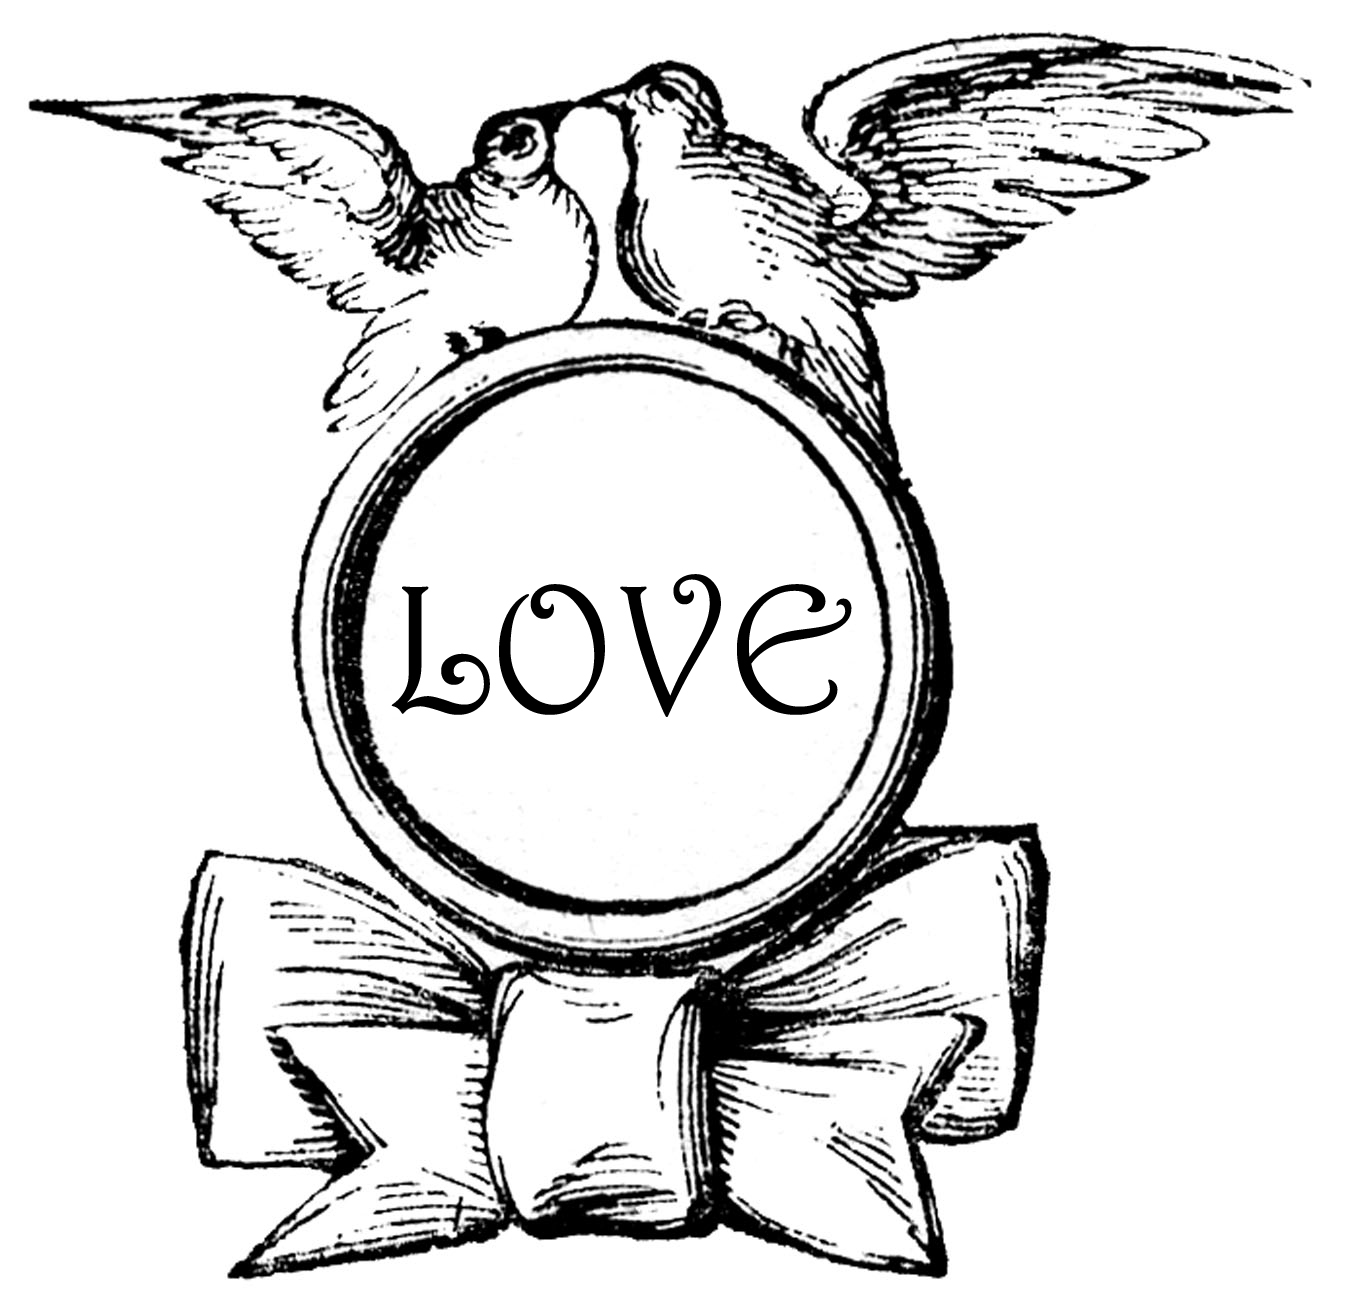 free black and white love clipart - photo #16